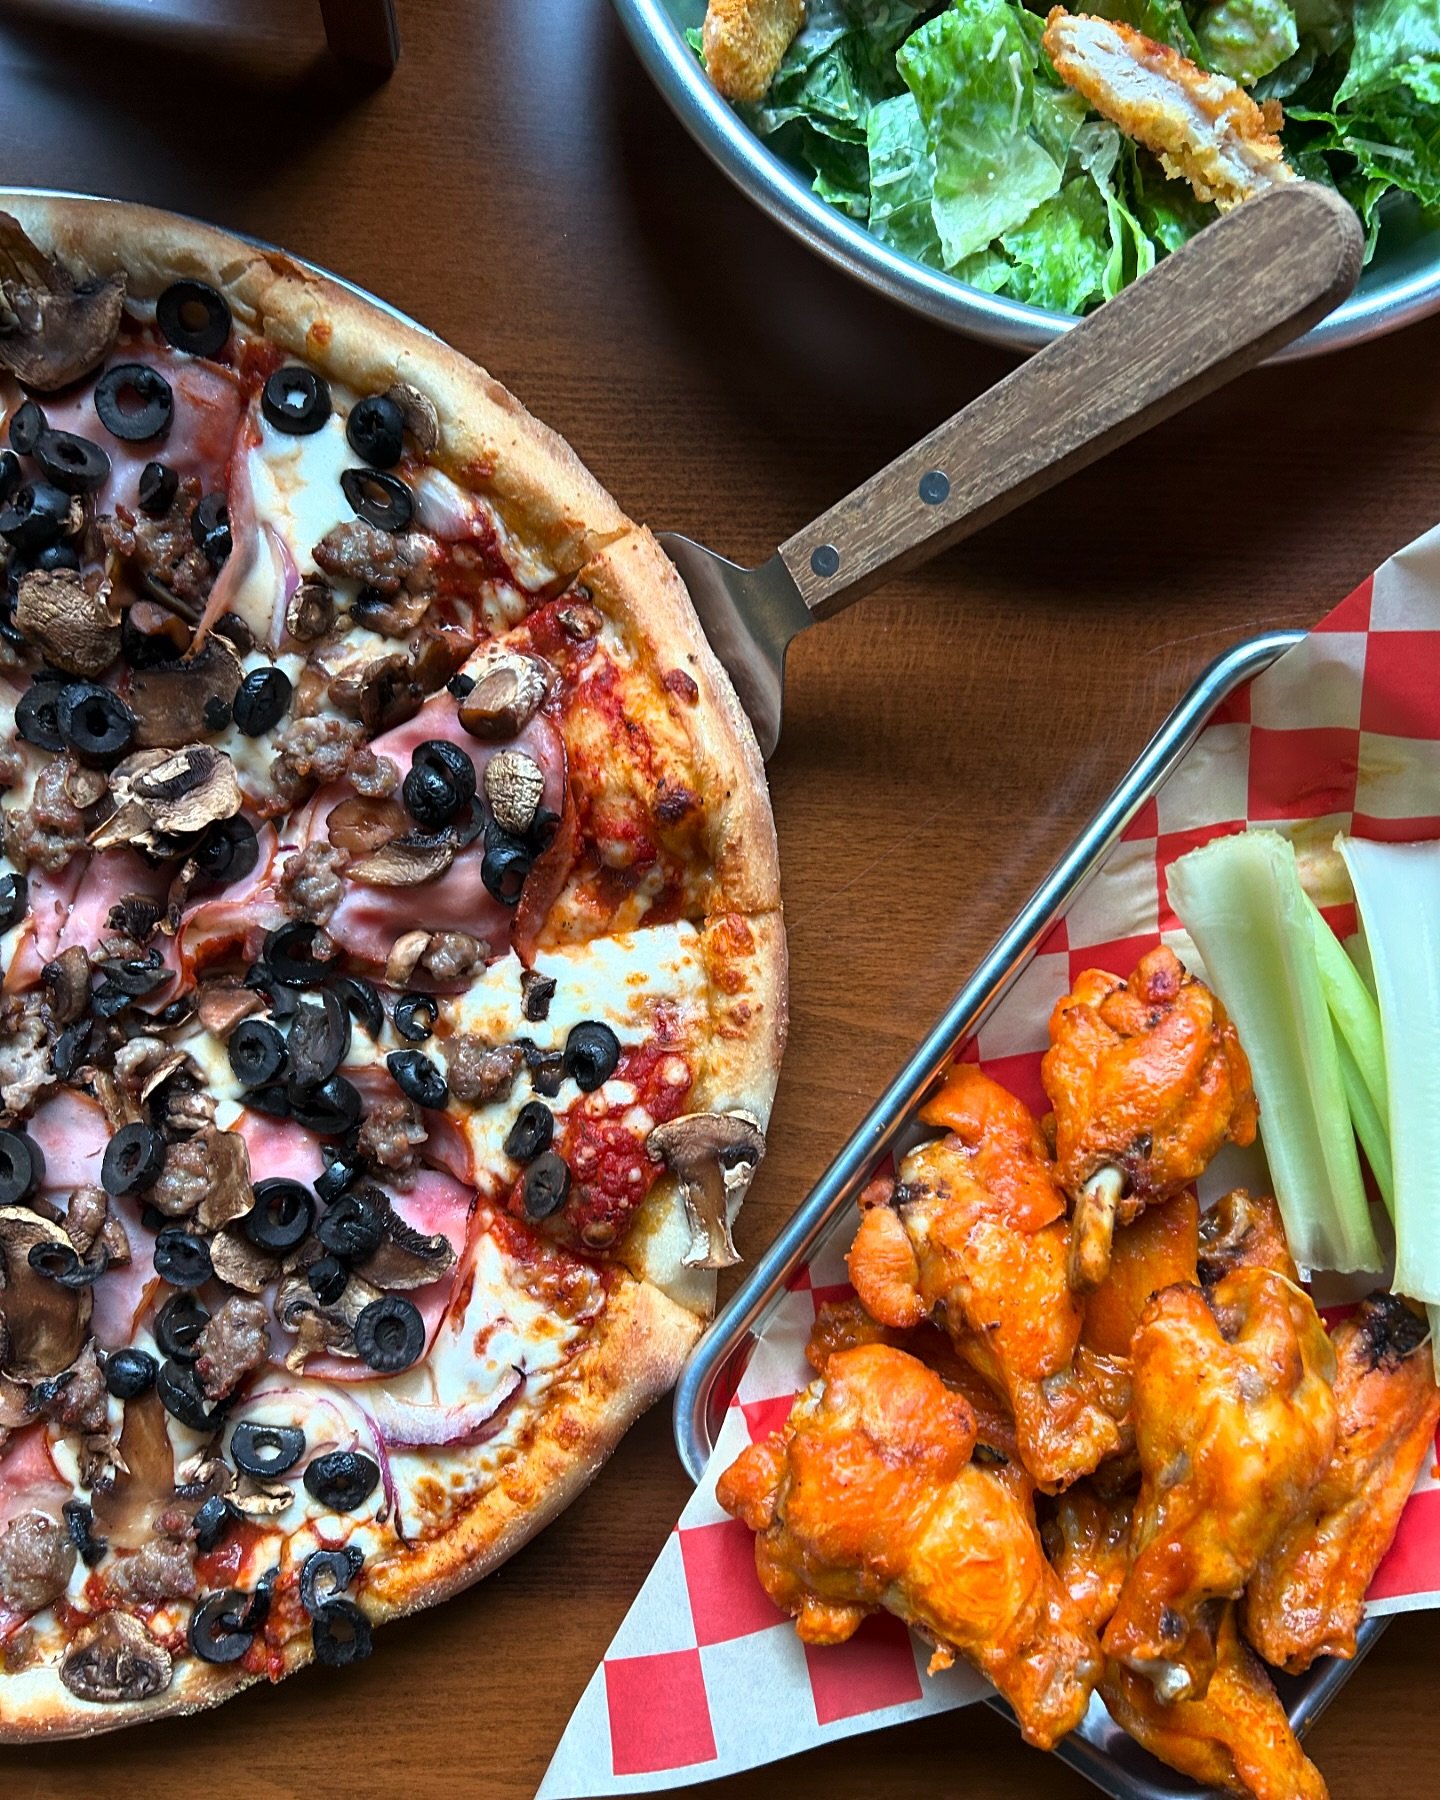 Monday blues? Not with the Brewmaster and our crispy hot wings. Just add a cold BCP Ale 🍺🍕🍗